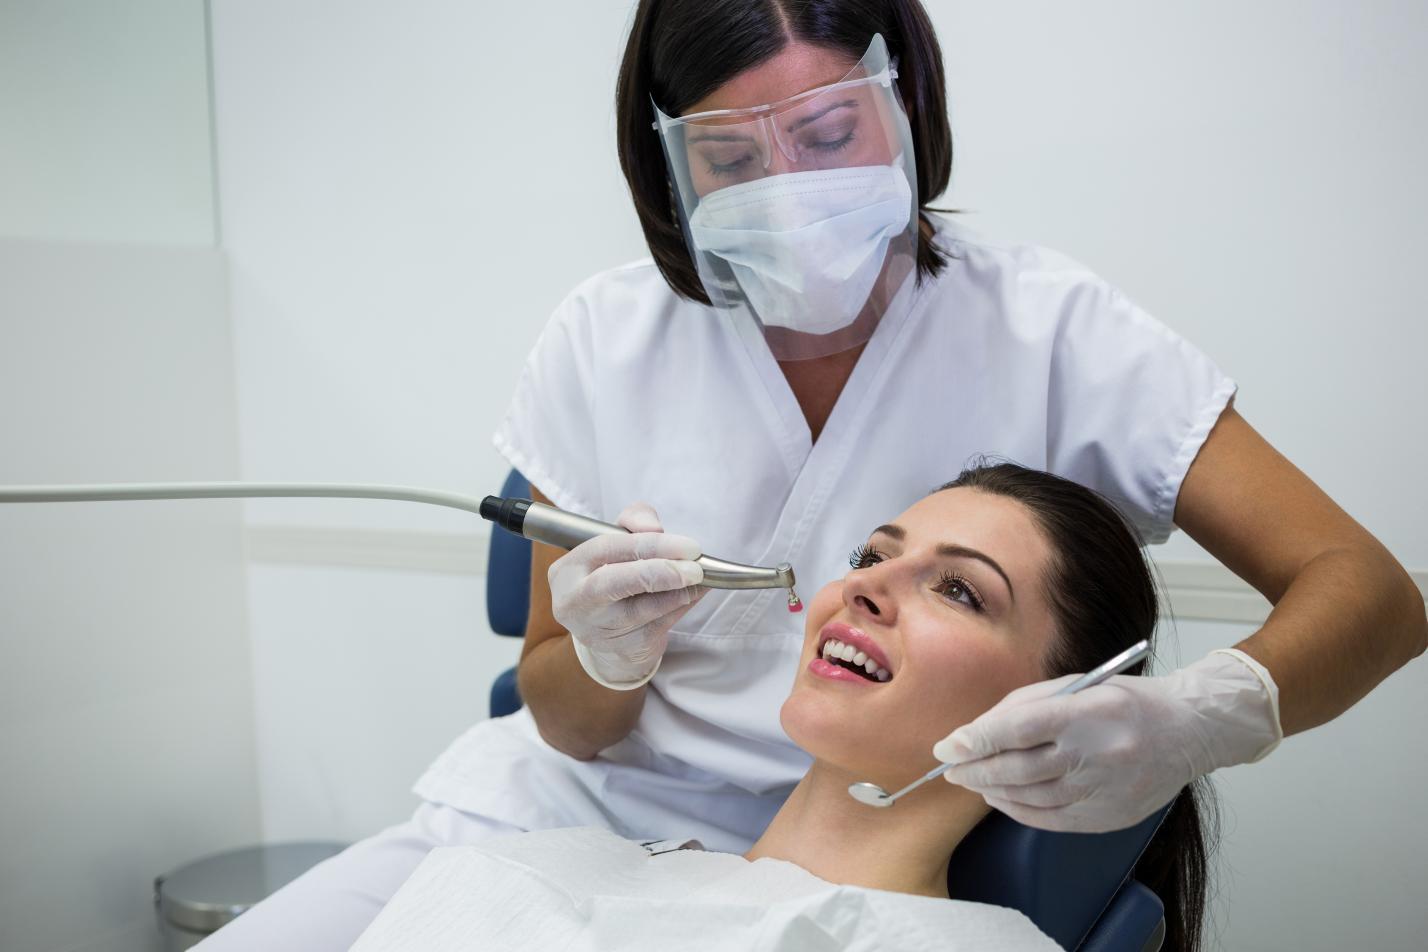 Top 7 Cosmetic Dentistry Procedure For a Smile Makeover